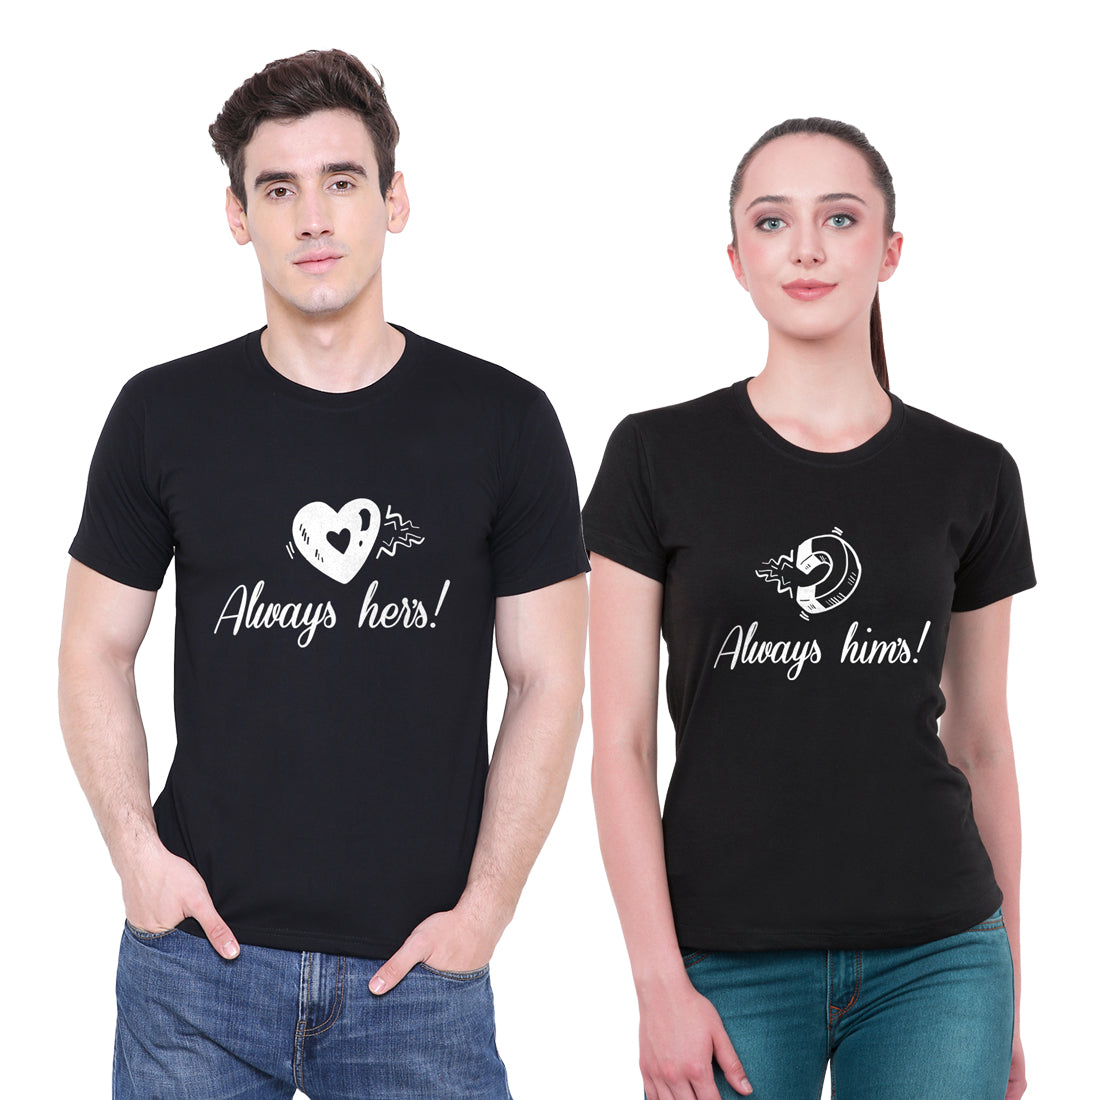 Always hims- Always hers  matching Couple T shirts- Black